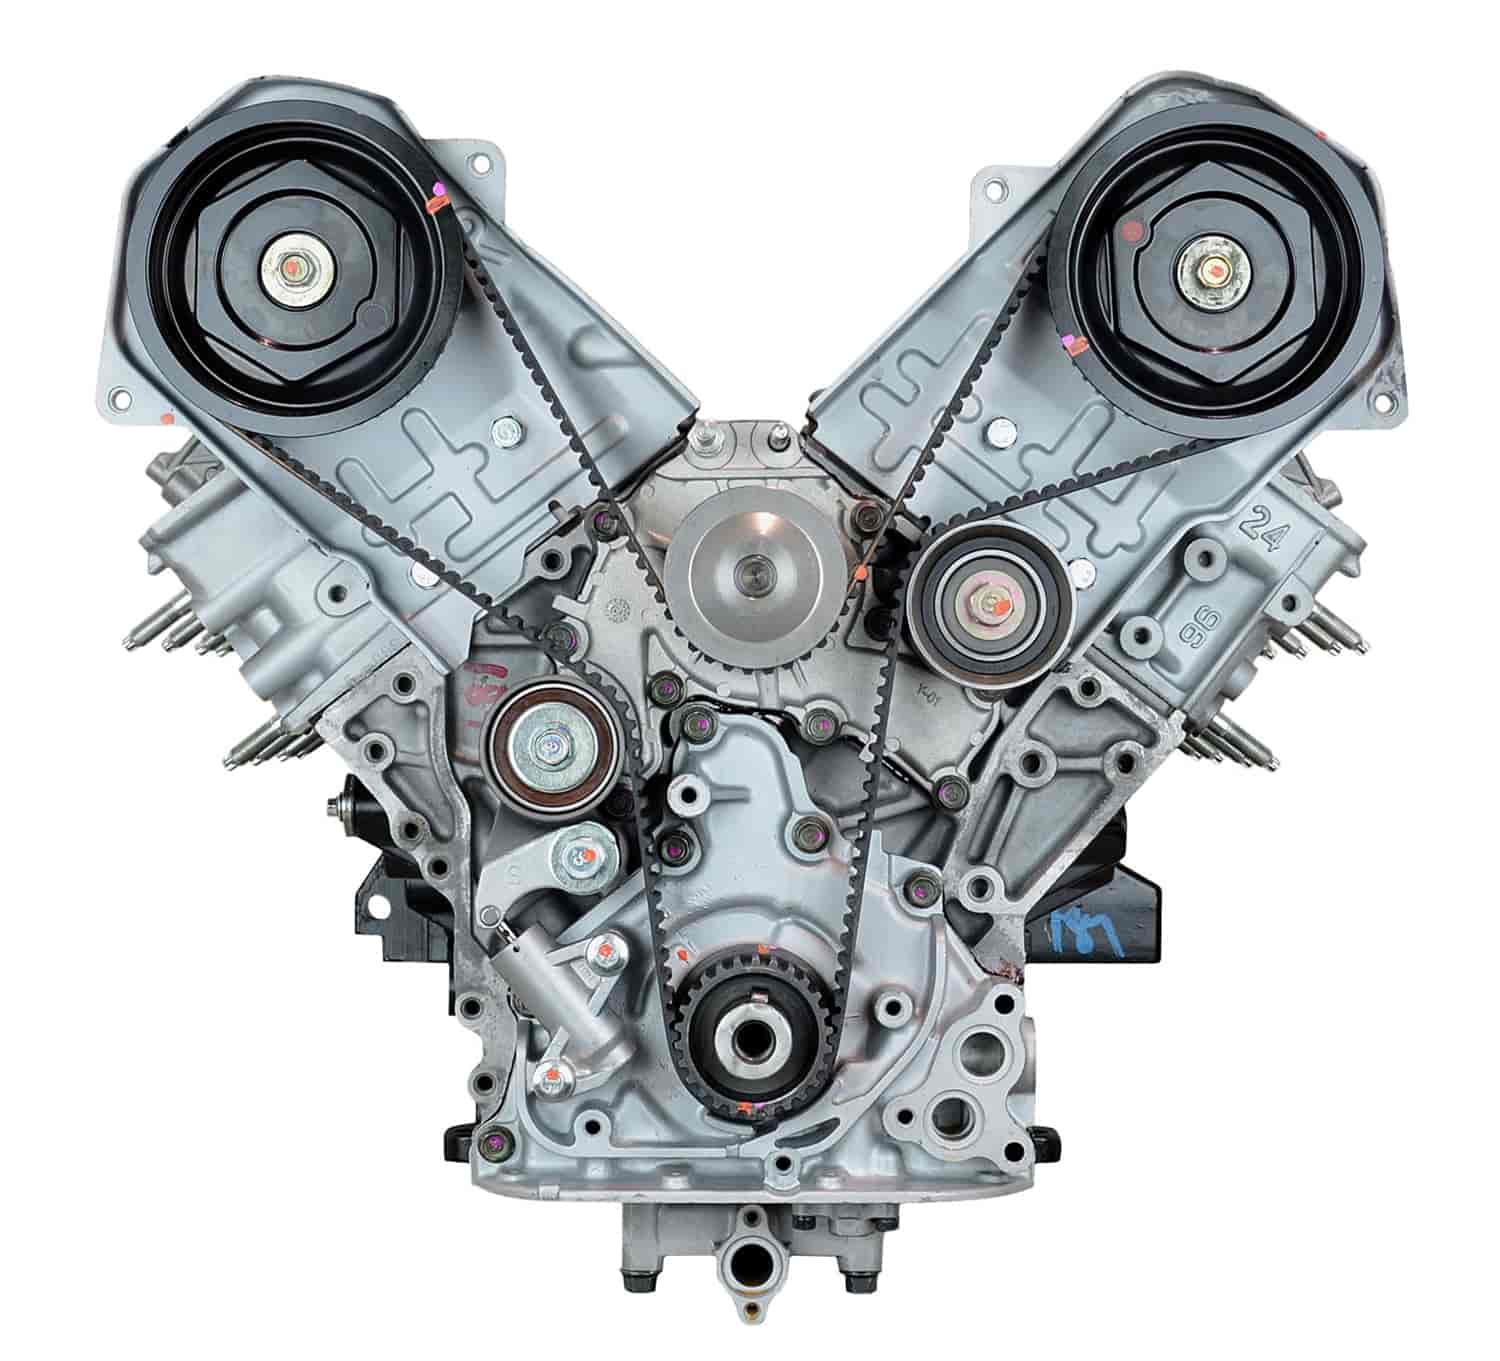 Remanufactured Crate Engine for 1995-1997 Isuzu, Acura, & Honda with 3.2L V6